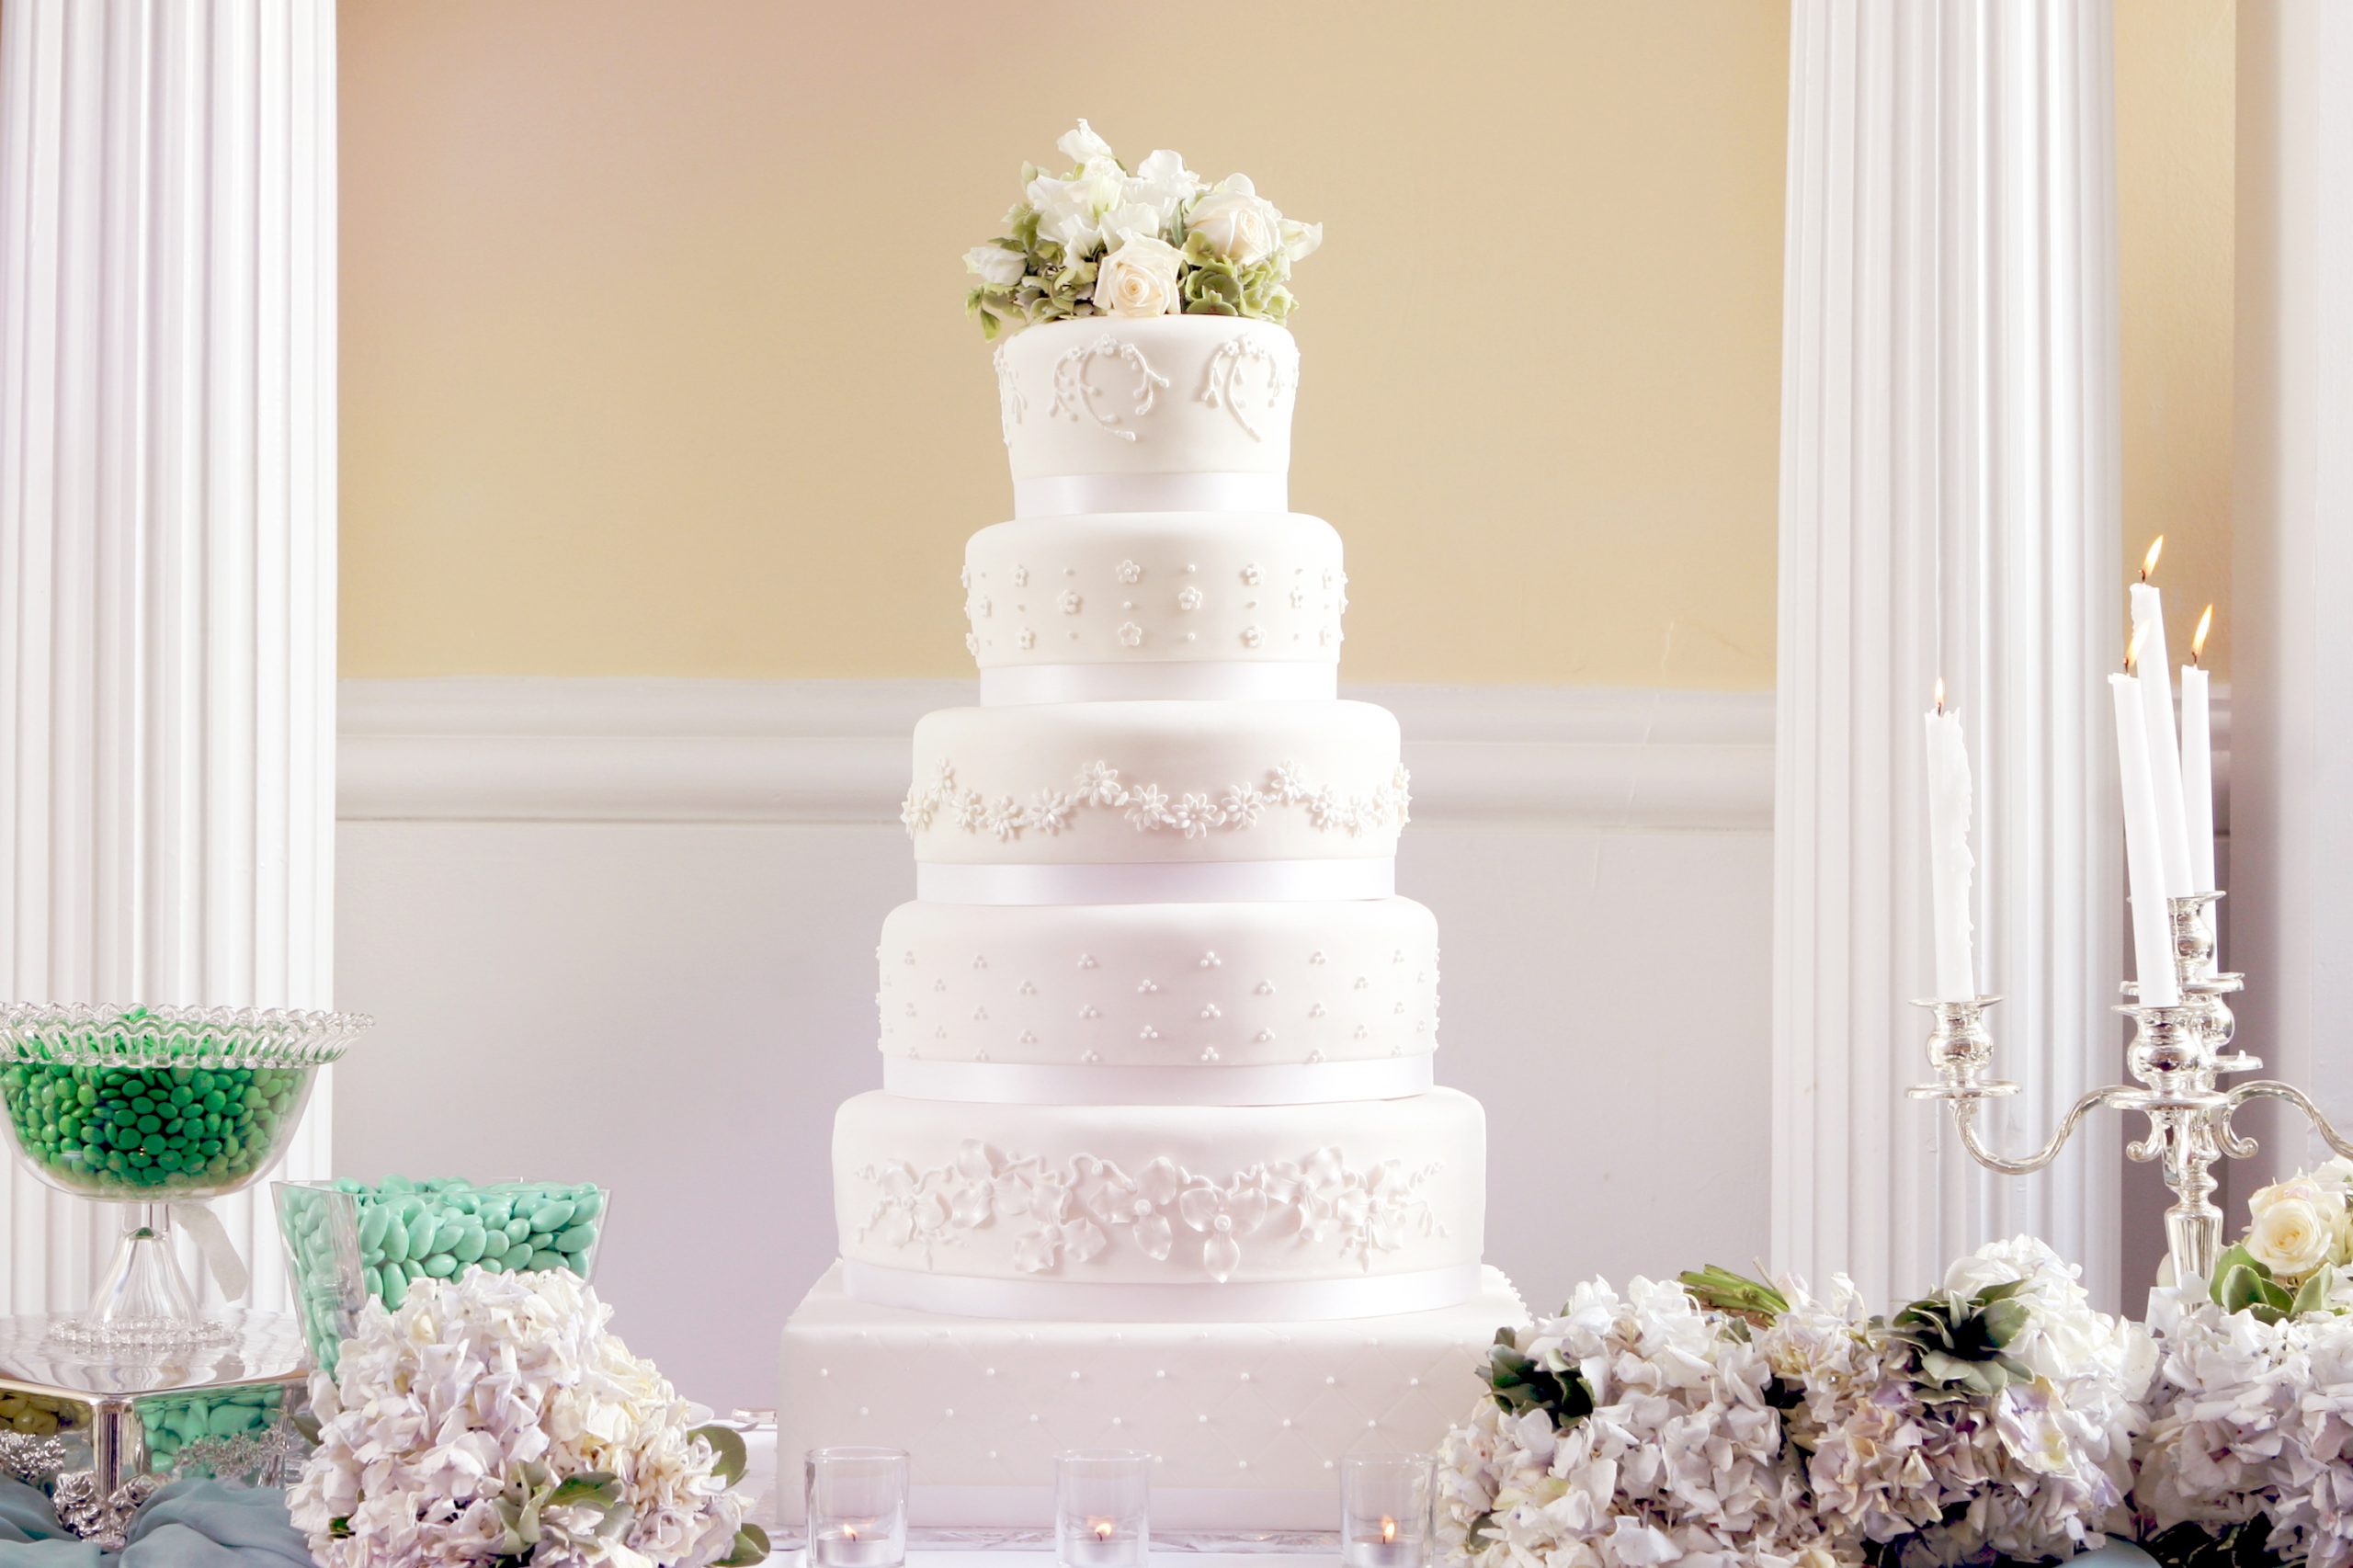 History of Fancy and Extravagant Wedding Cakes